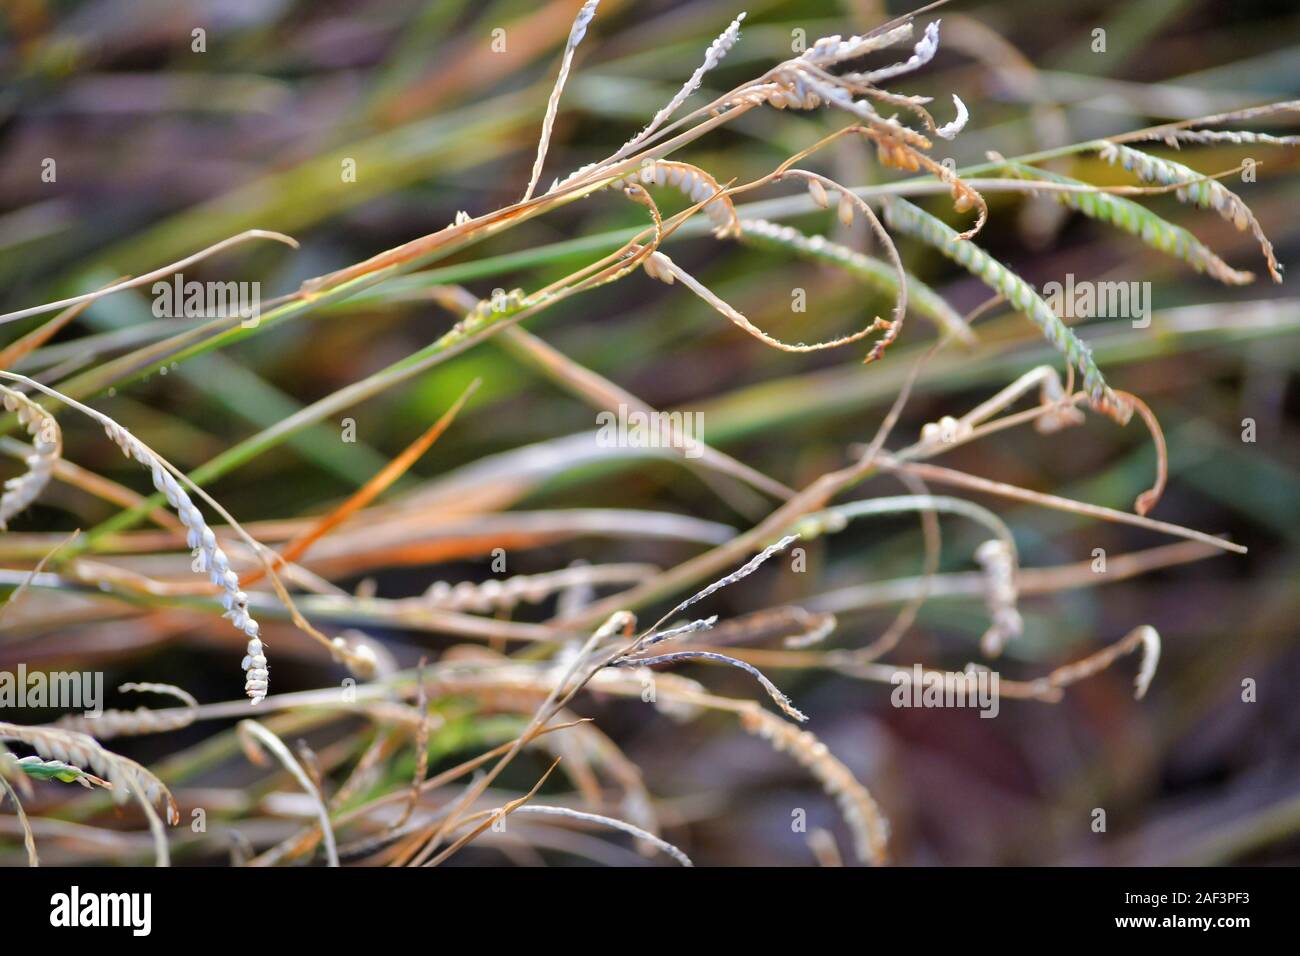 Eragrostis curvula is a species of grass known by the common name weeping lovegrass. Stock Photo